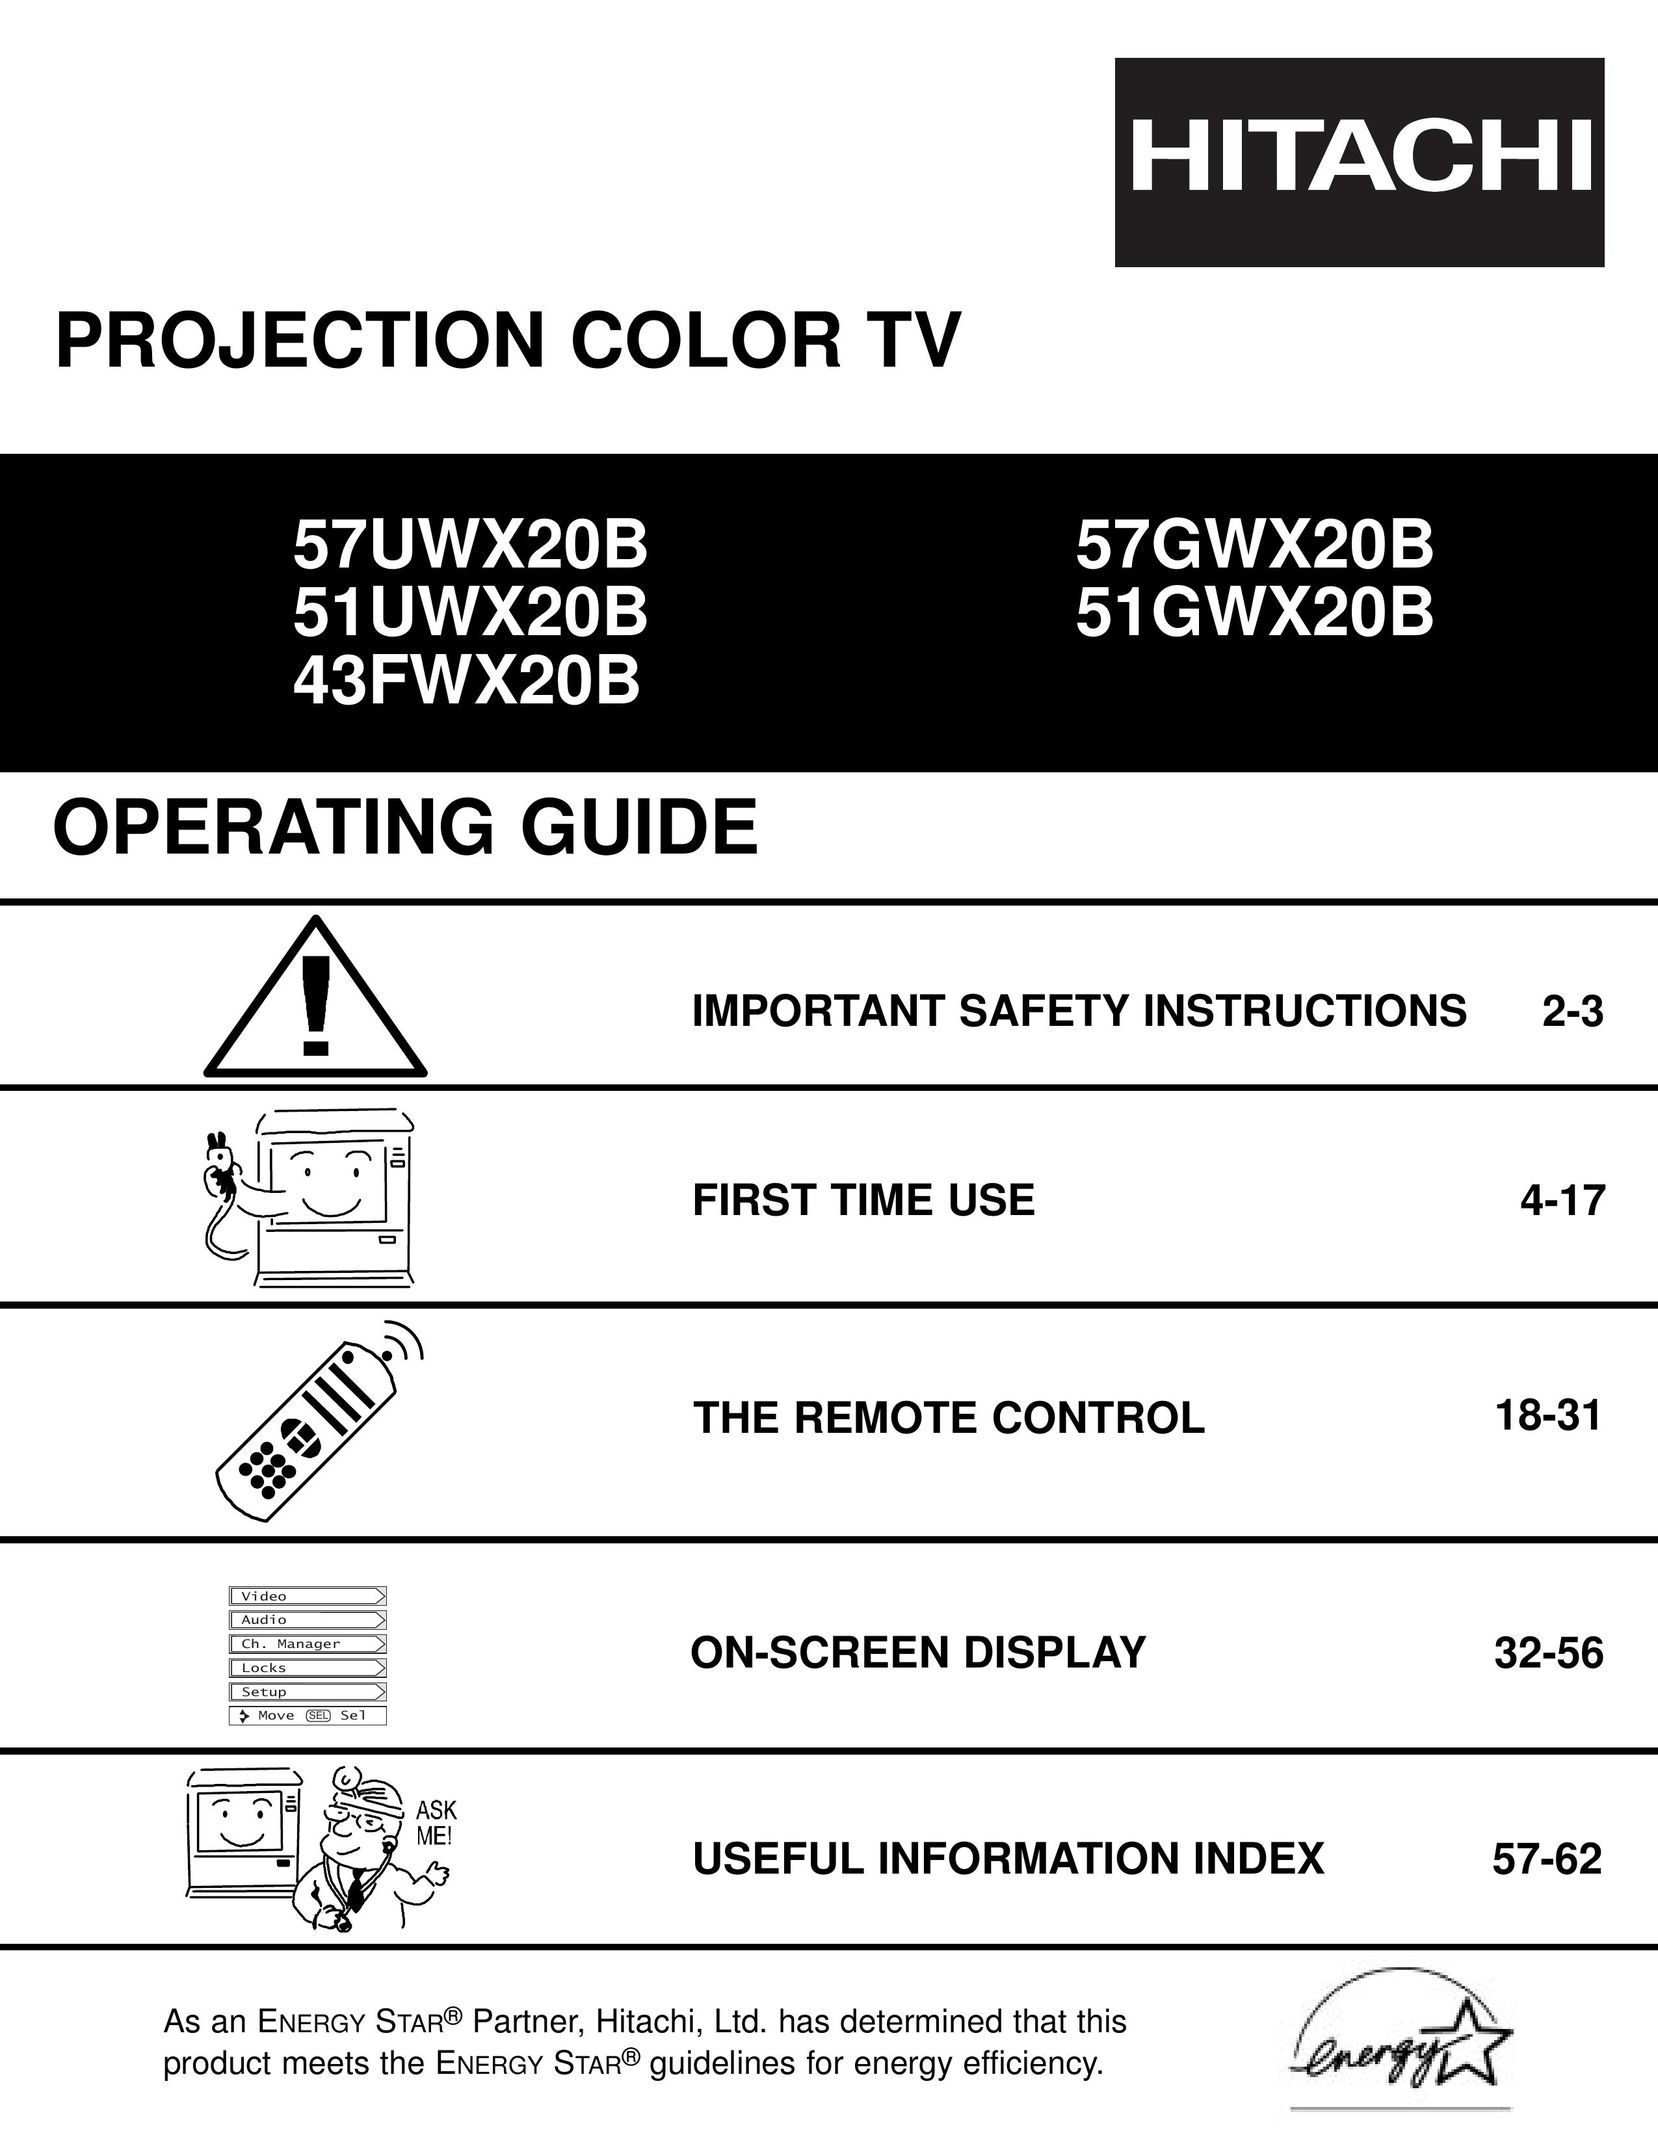 Hitachi 43FWX20B Projection Television User Manual